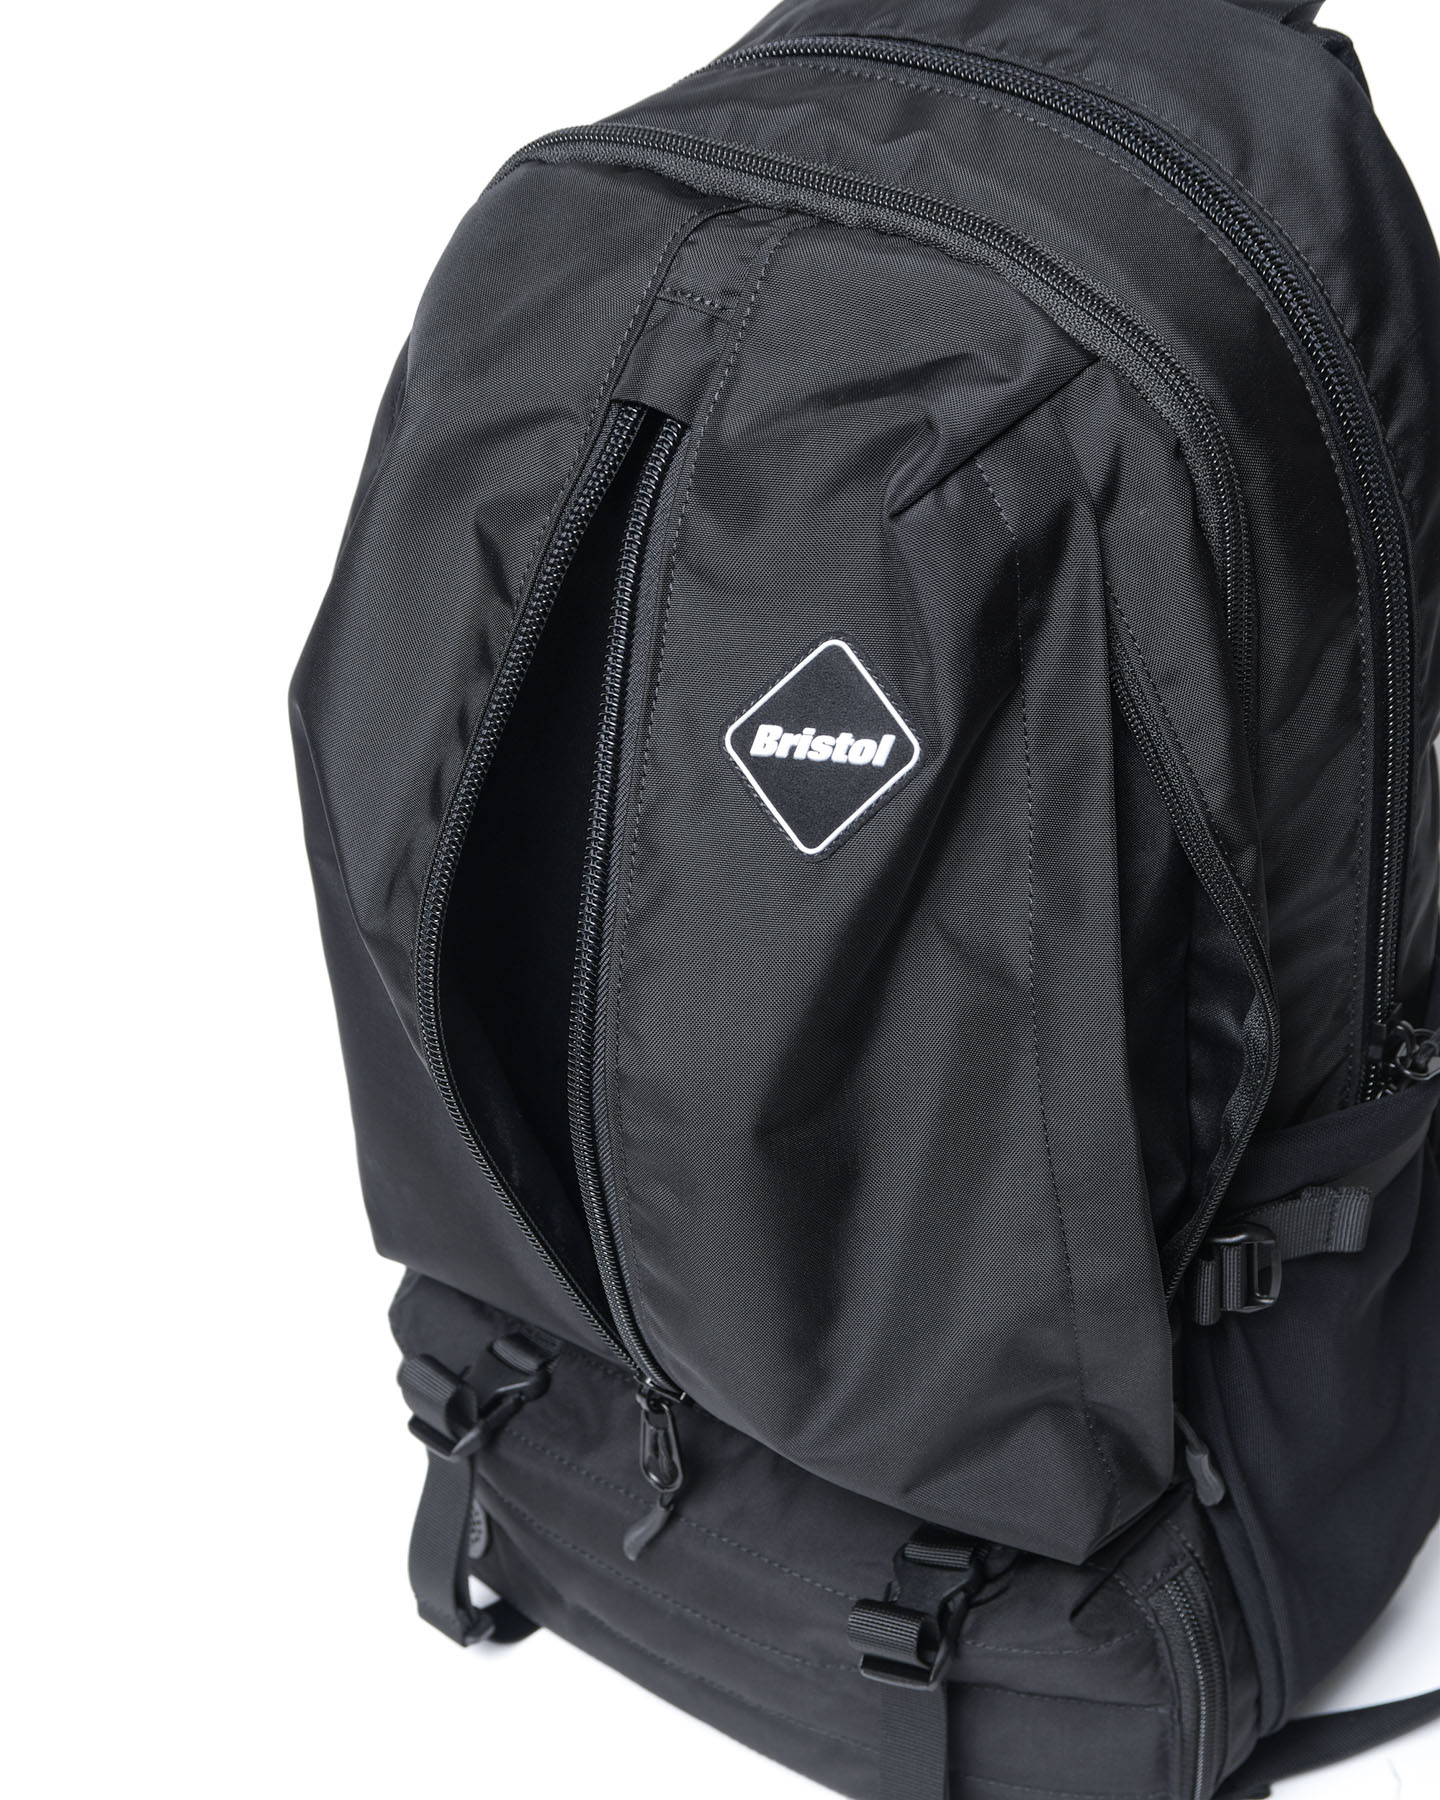 TOUFCRB TOUR BACKPACK　バックパック